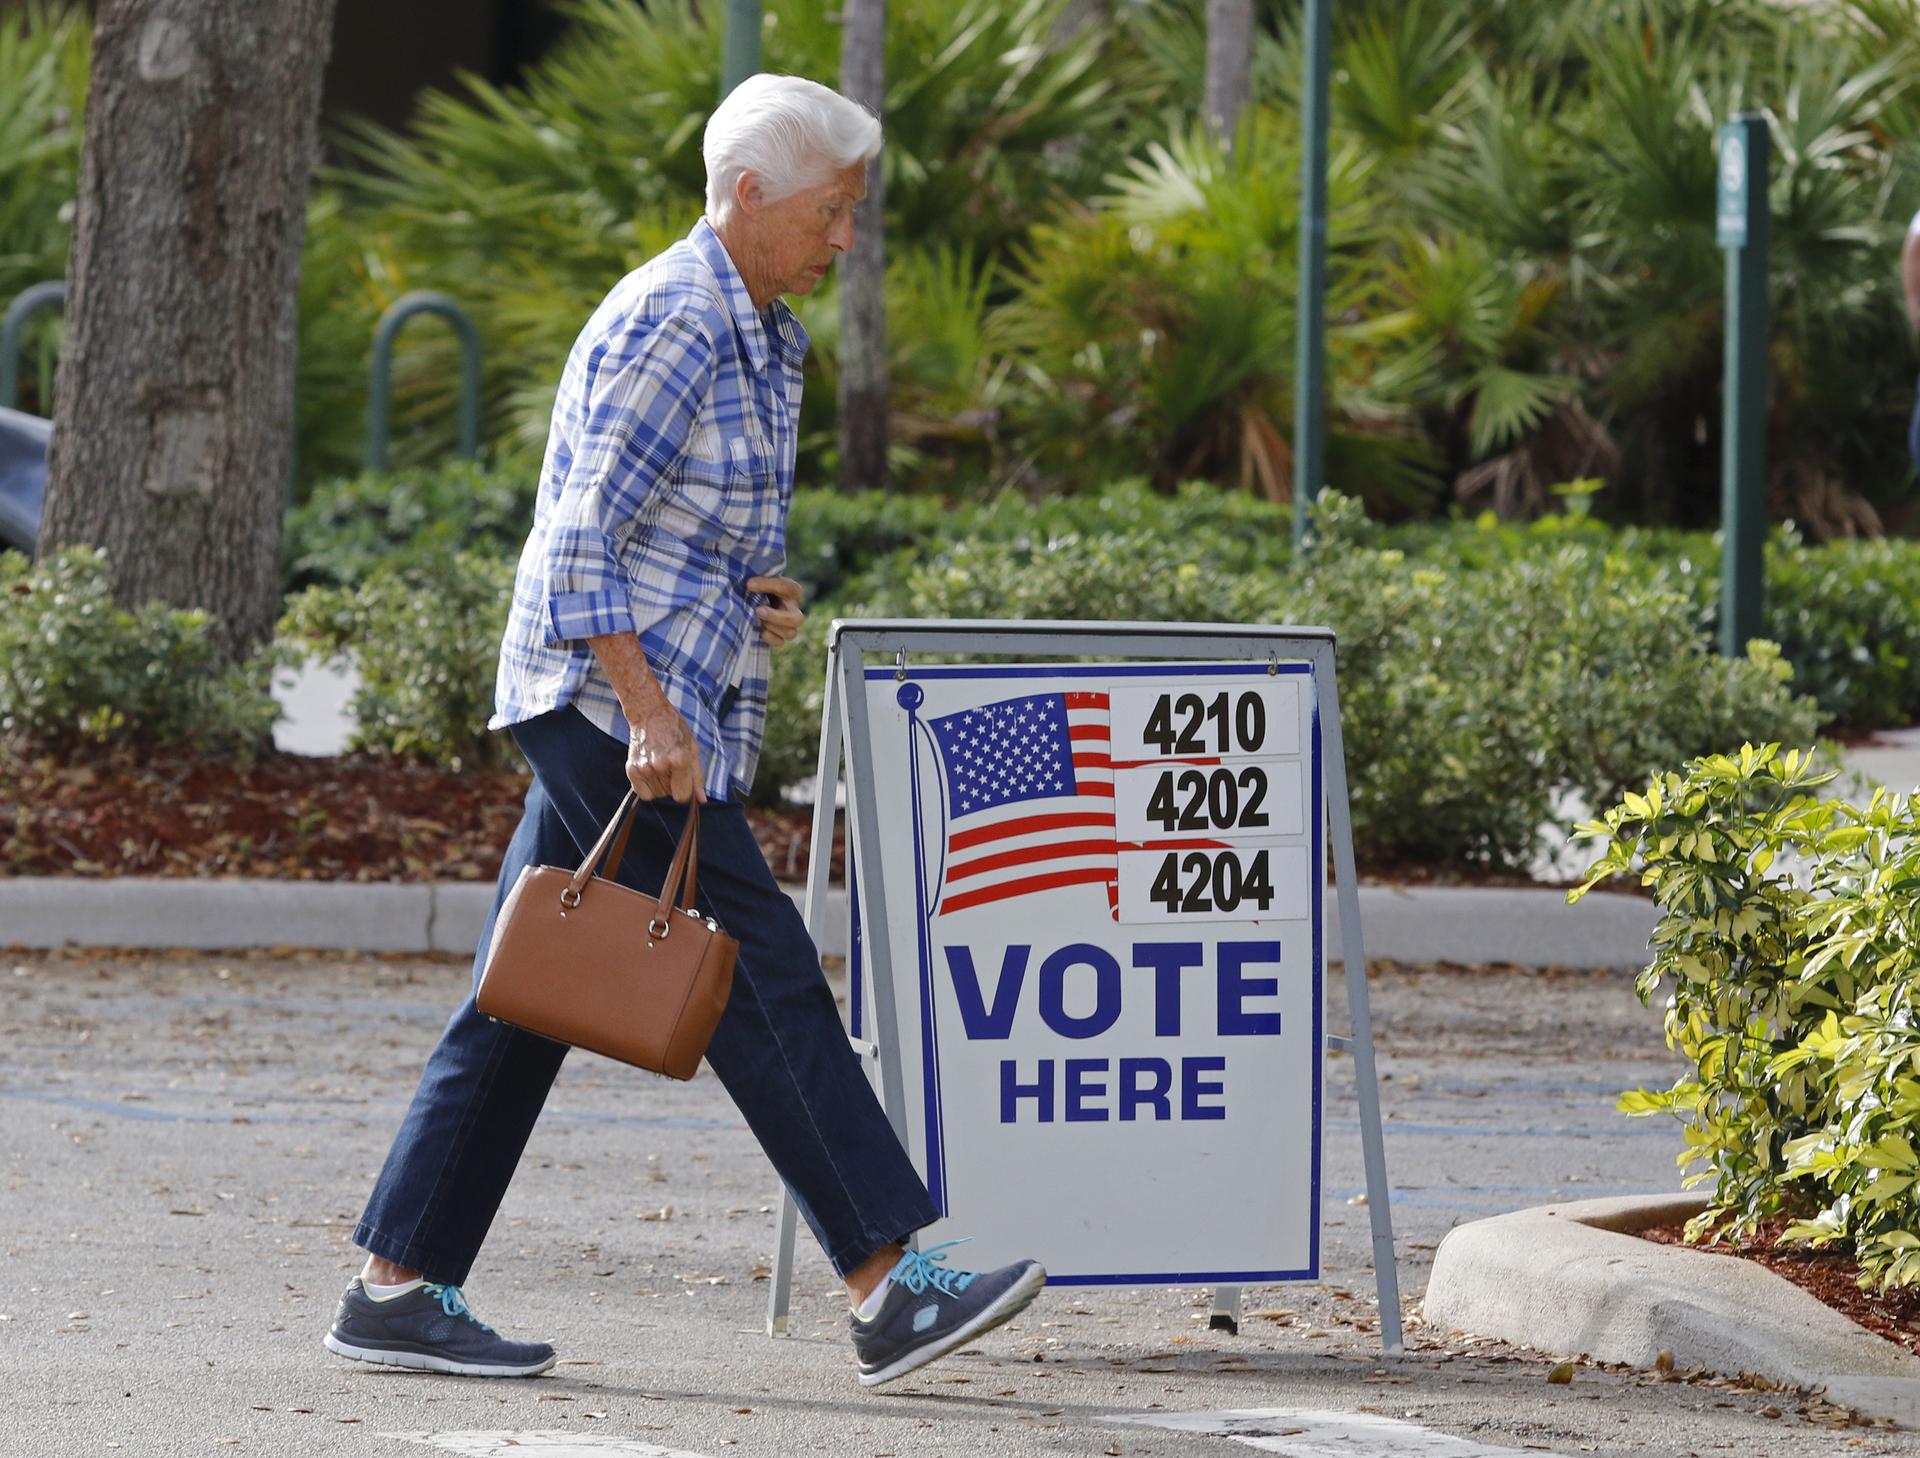 A voter walks to a polling precinct